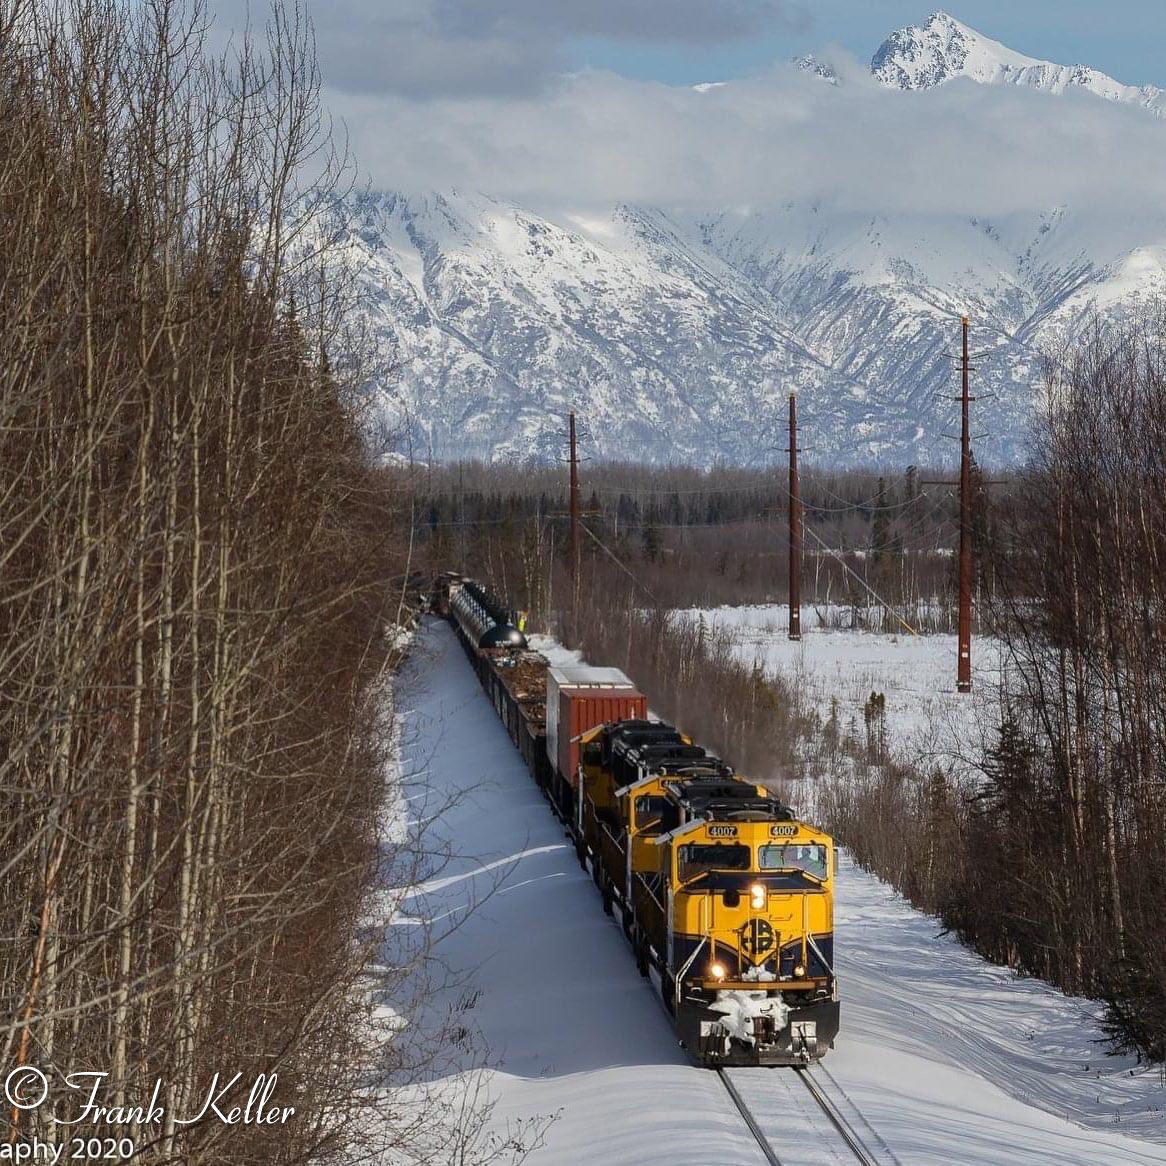 The Talkeetna Mountains stand tall as the south freight rolls by MP 145 on a crisp morning.